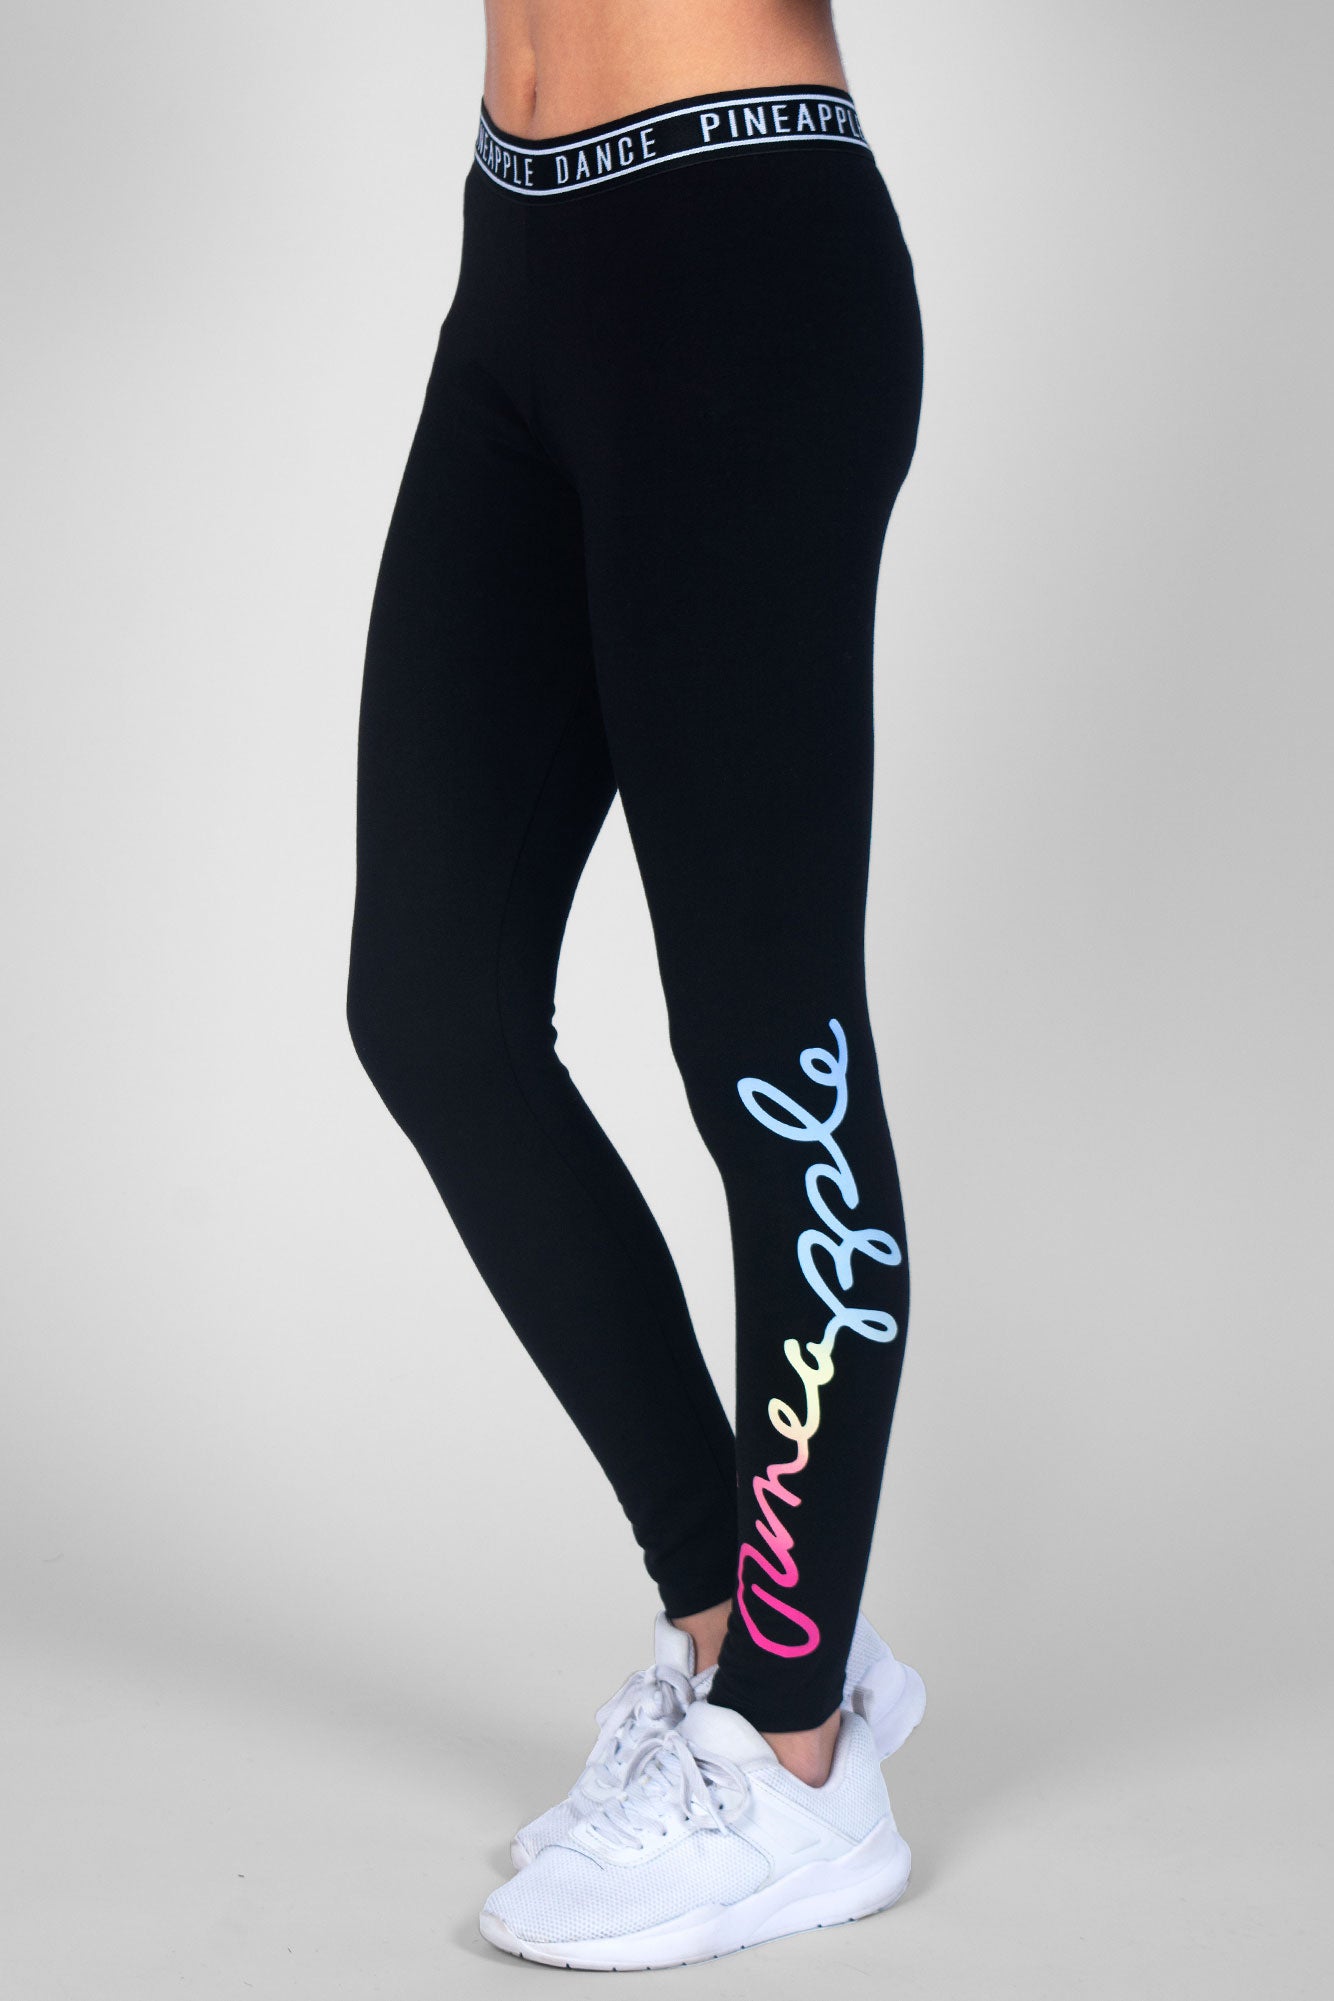 Buy Kica High Waisted Cotton Dance Joggers With Rib Waistband and Cuffs  online